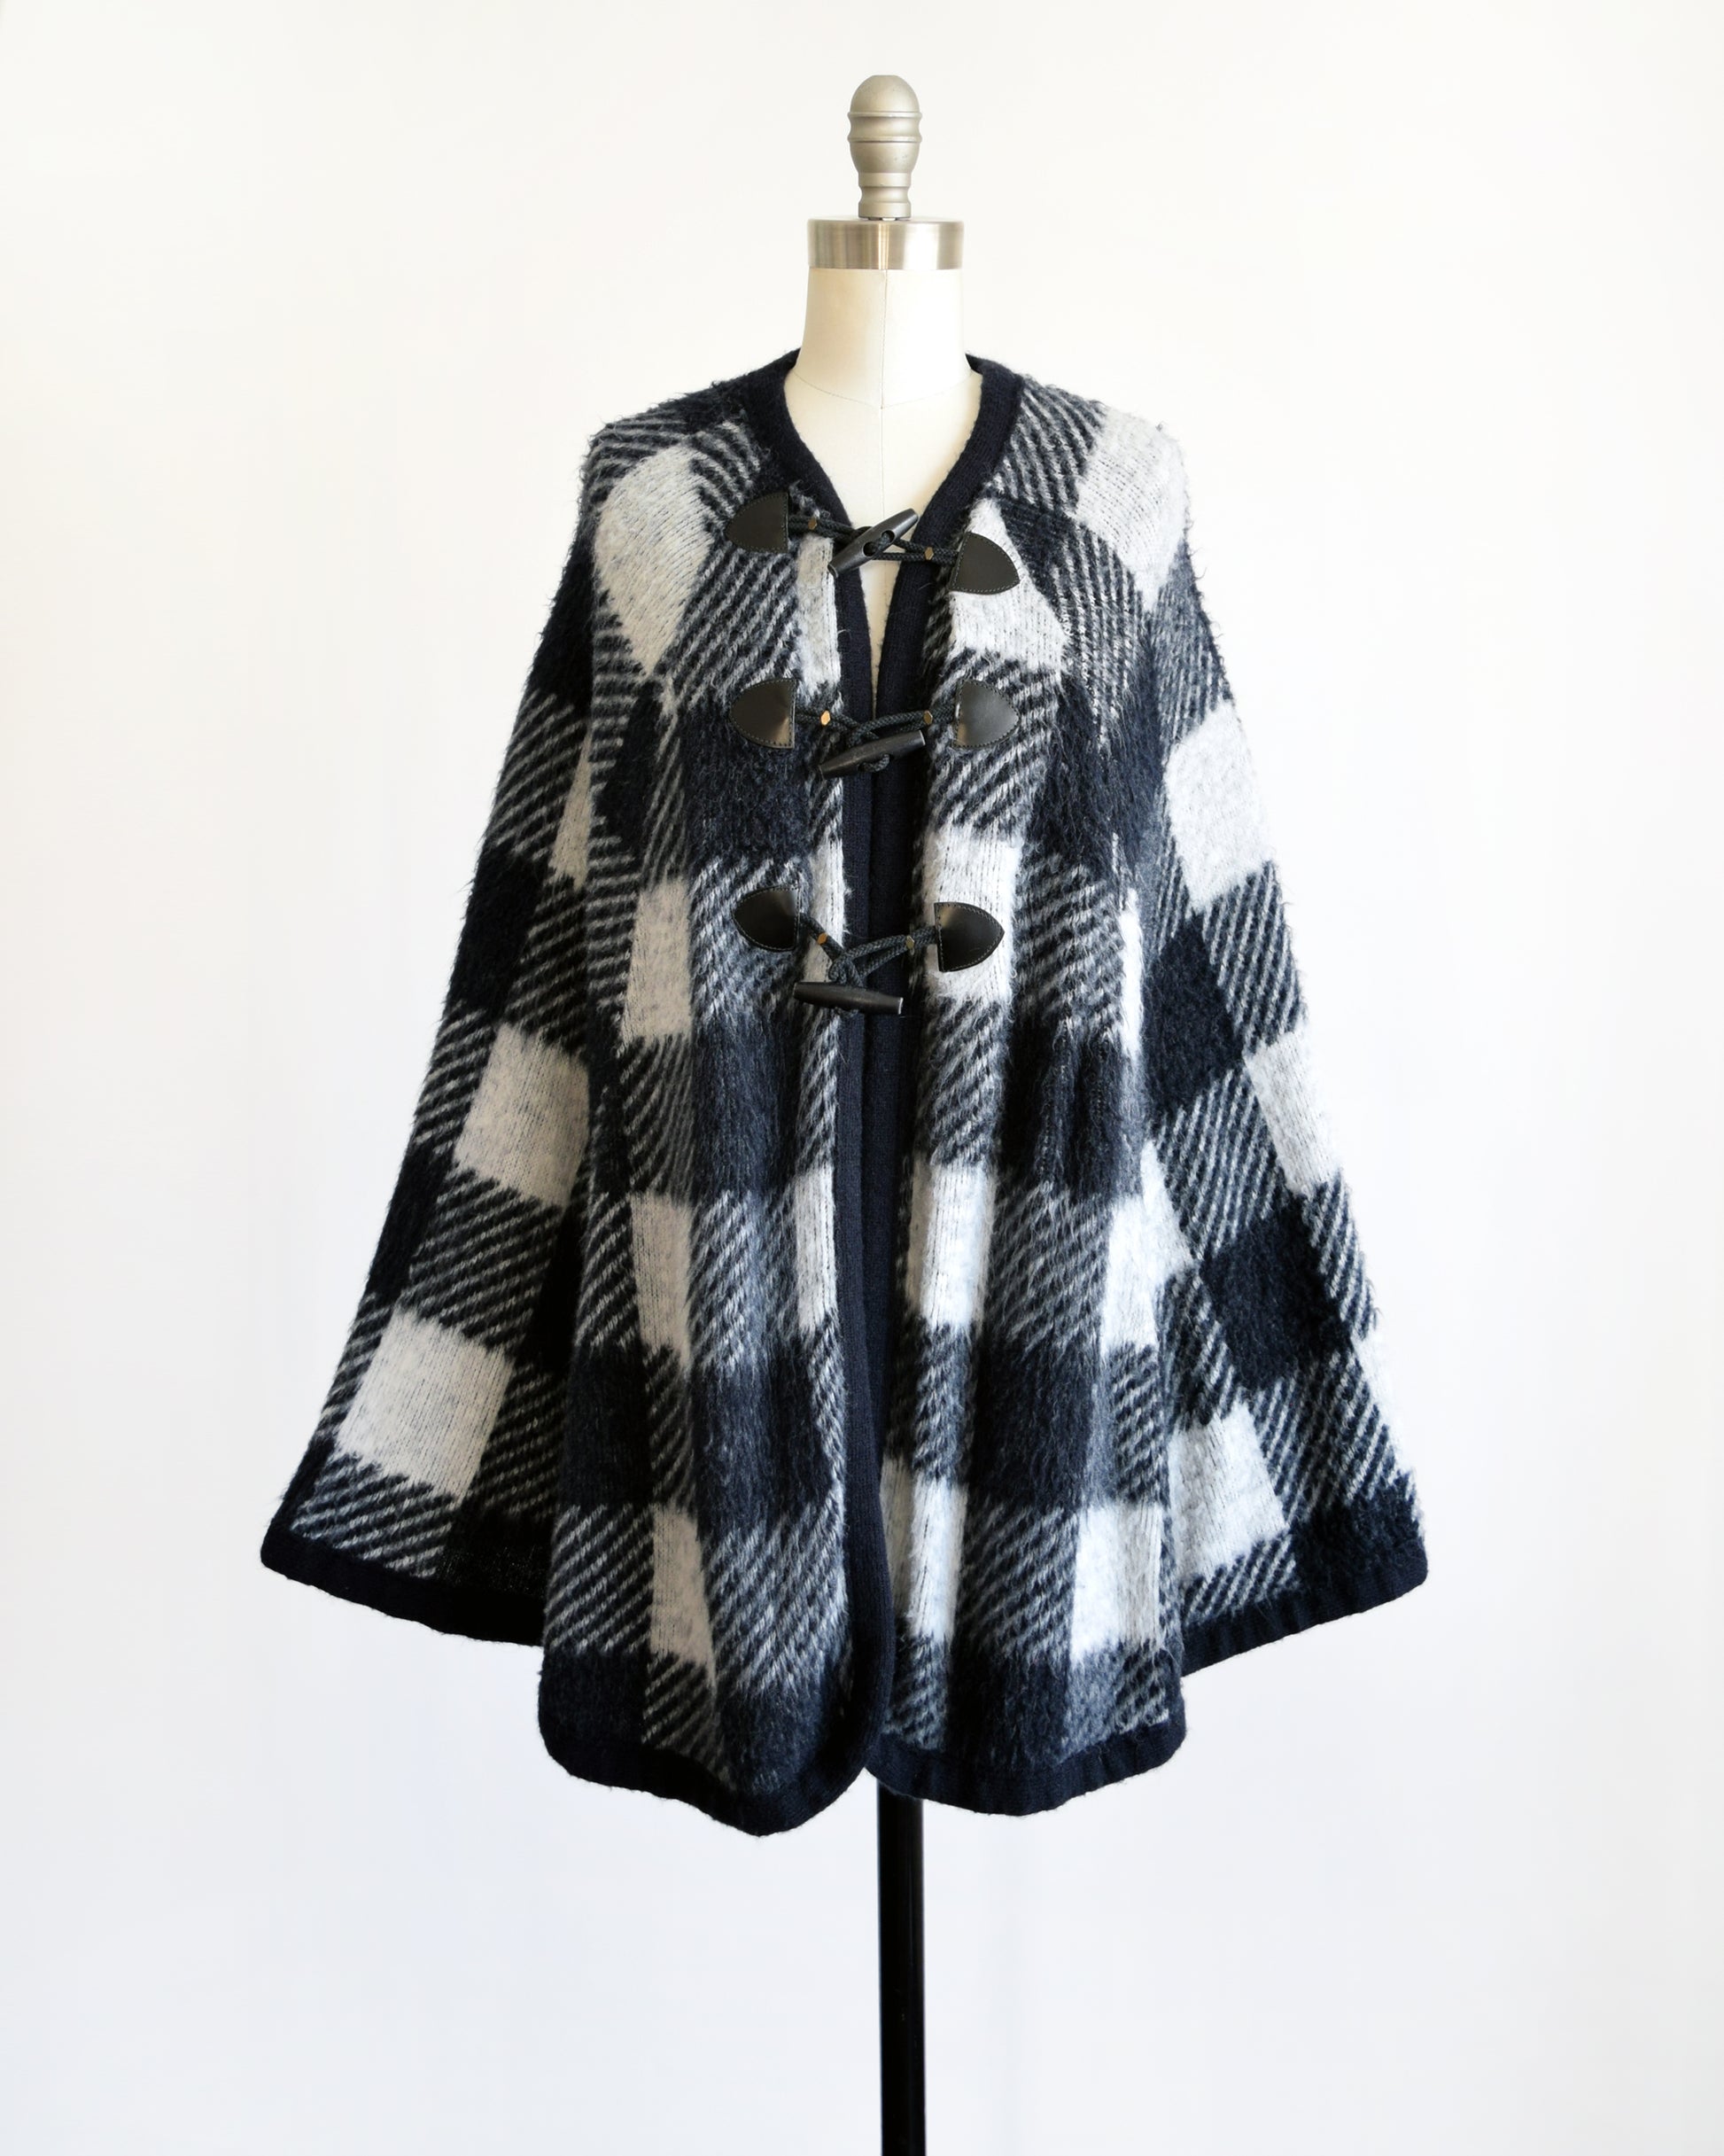 A vintage 1970s black and white plaid poncho with three toggle buttons on the front.